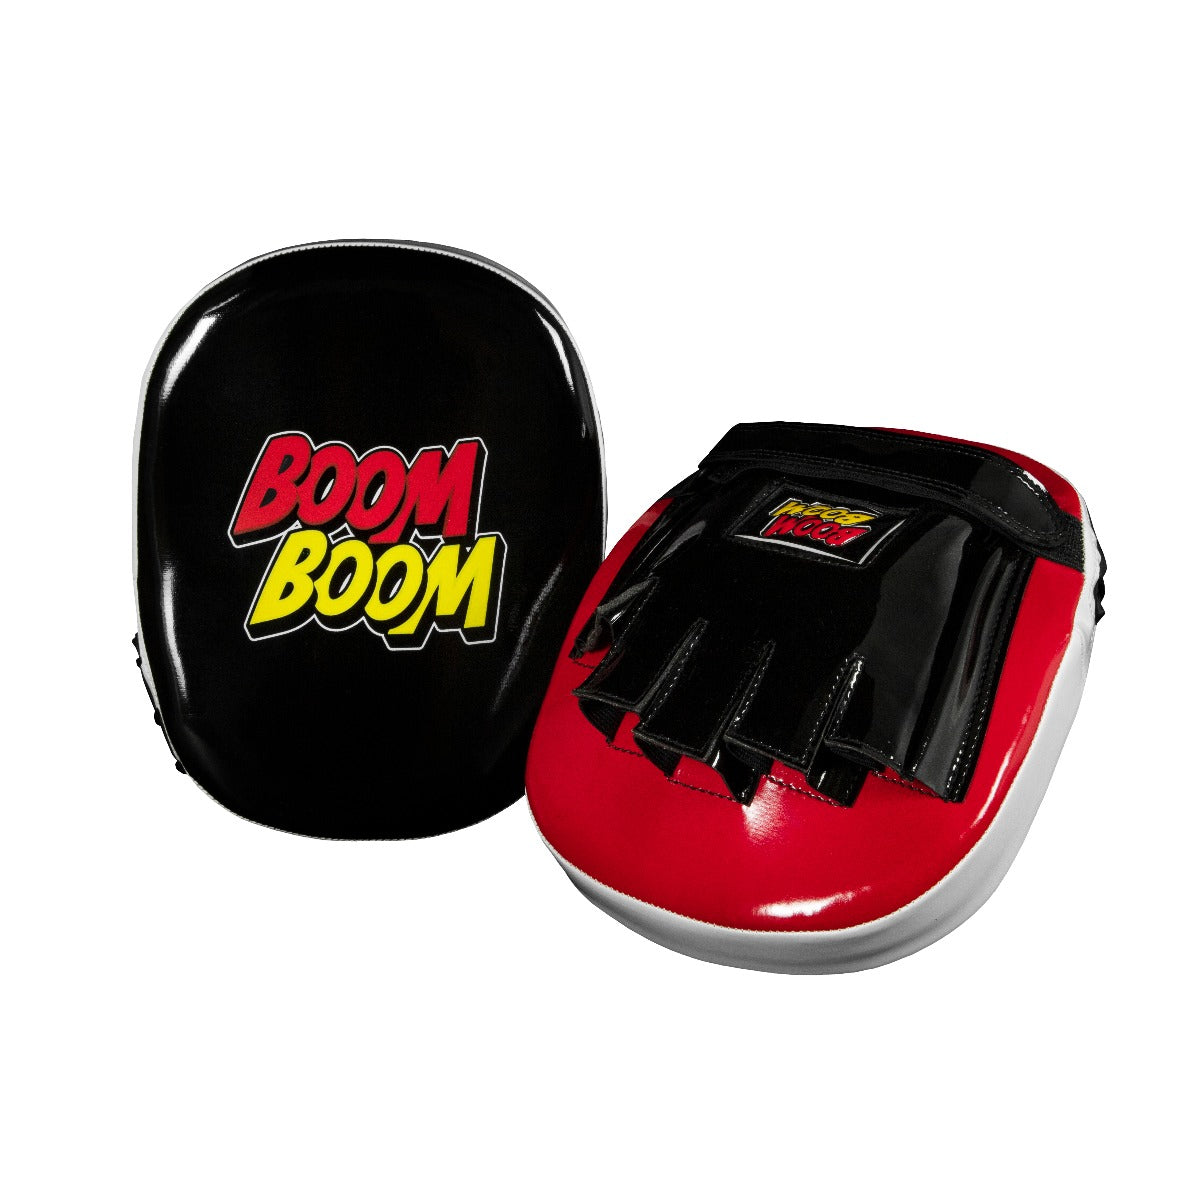 Red/White/Black Title Boxing Boom Boom Bomber Boxing and MMA Micro Punch Mitts 